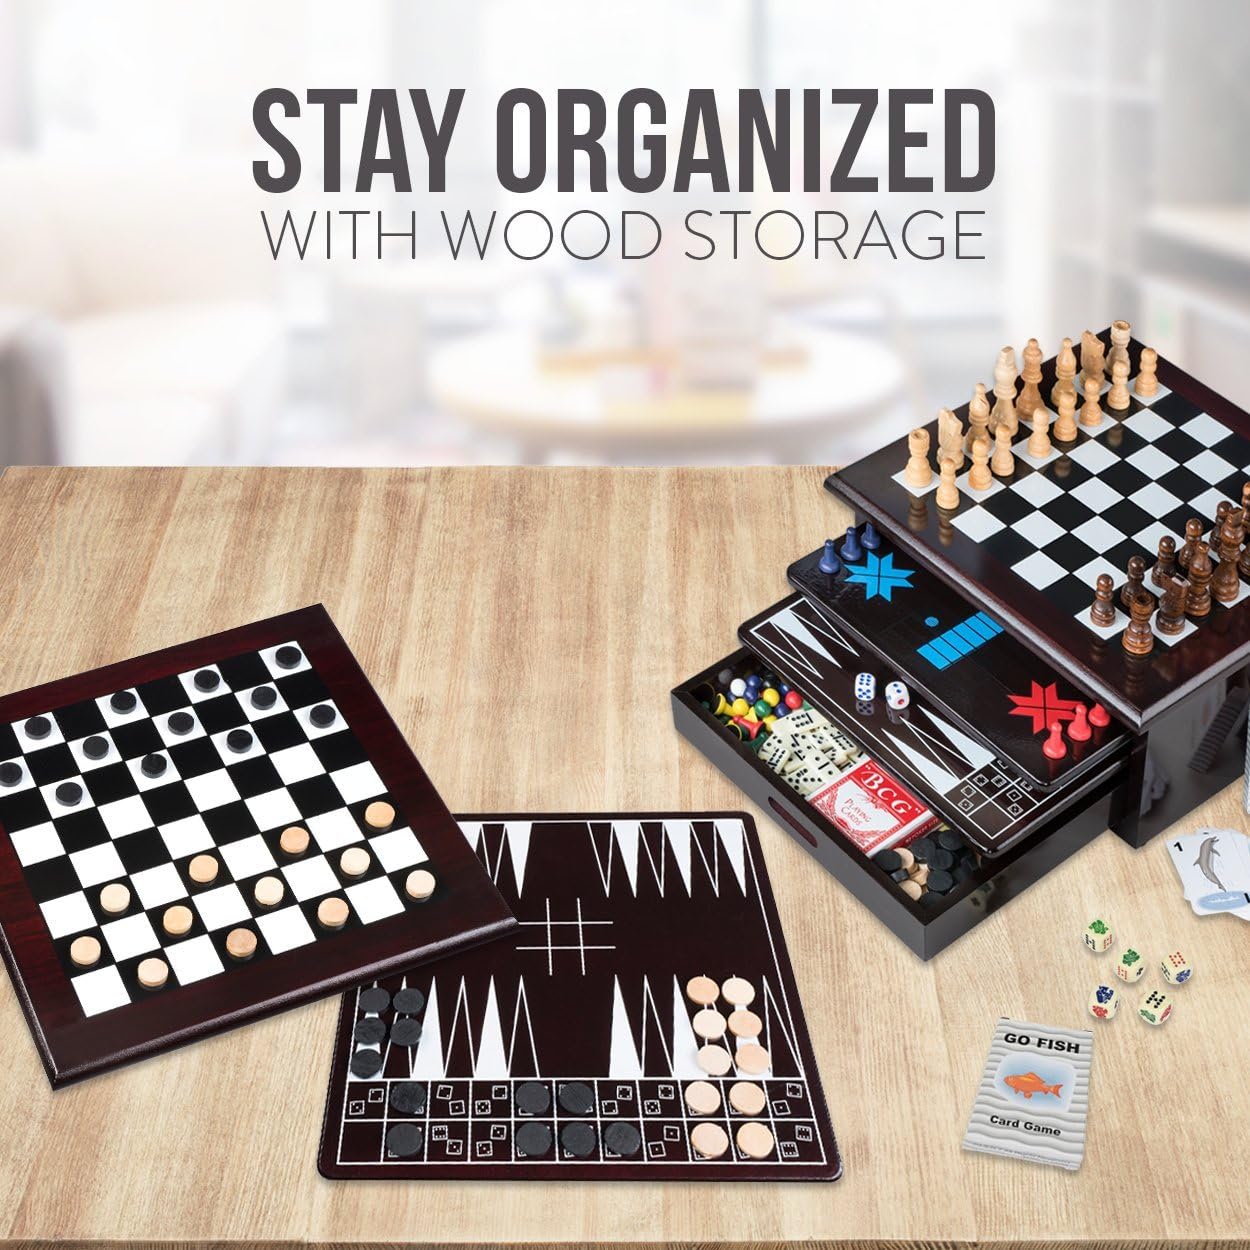 Board Game Set - Deluxe 15 in 1 Tabletop Wood-Accented Game Center with Storage Drawer (Checkers, Chess, Chinese Checkers, Parcheesi, Tictactoe, Solitaire, Snakes and Ladders, Mancala, Backgammon, Poker Dice, Playing Cards, Go Fish, Old Maid, and Dominos)